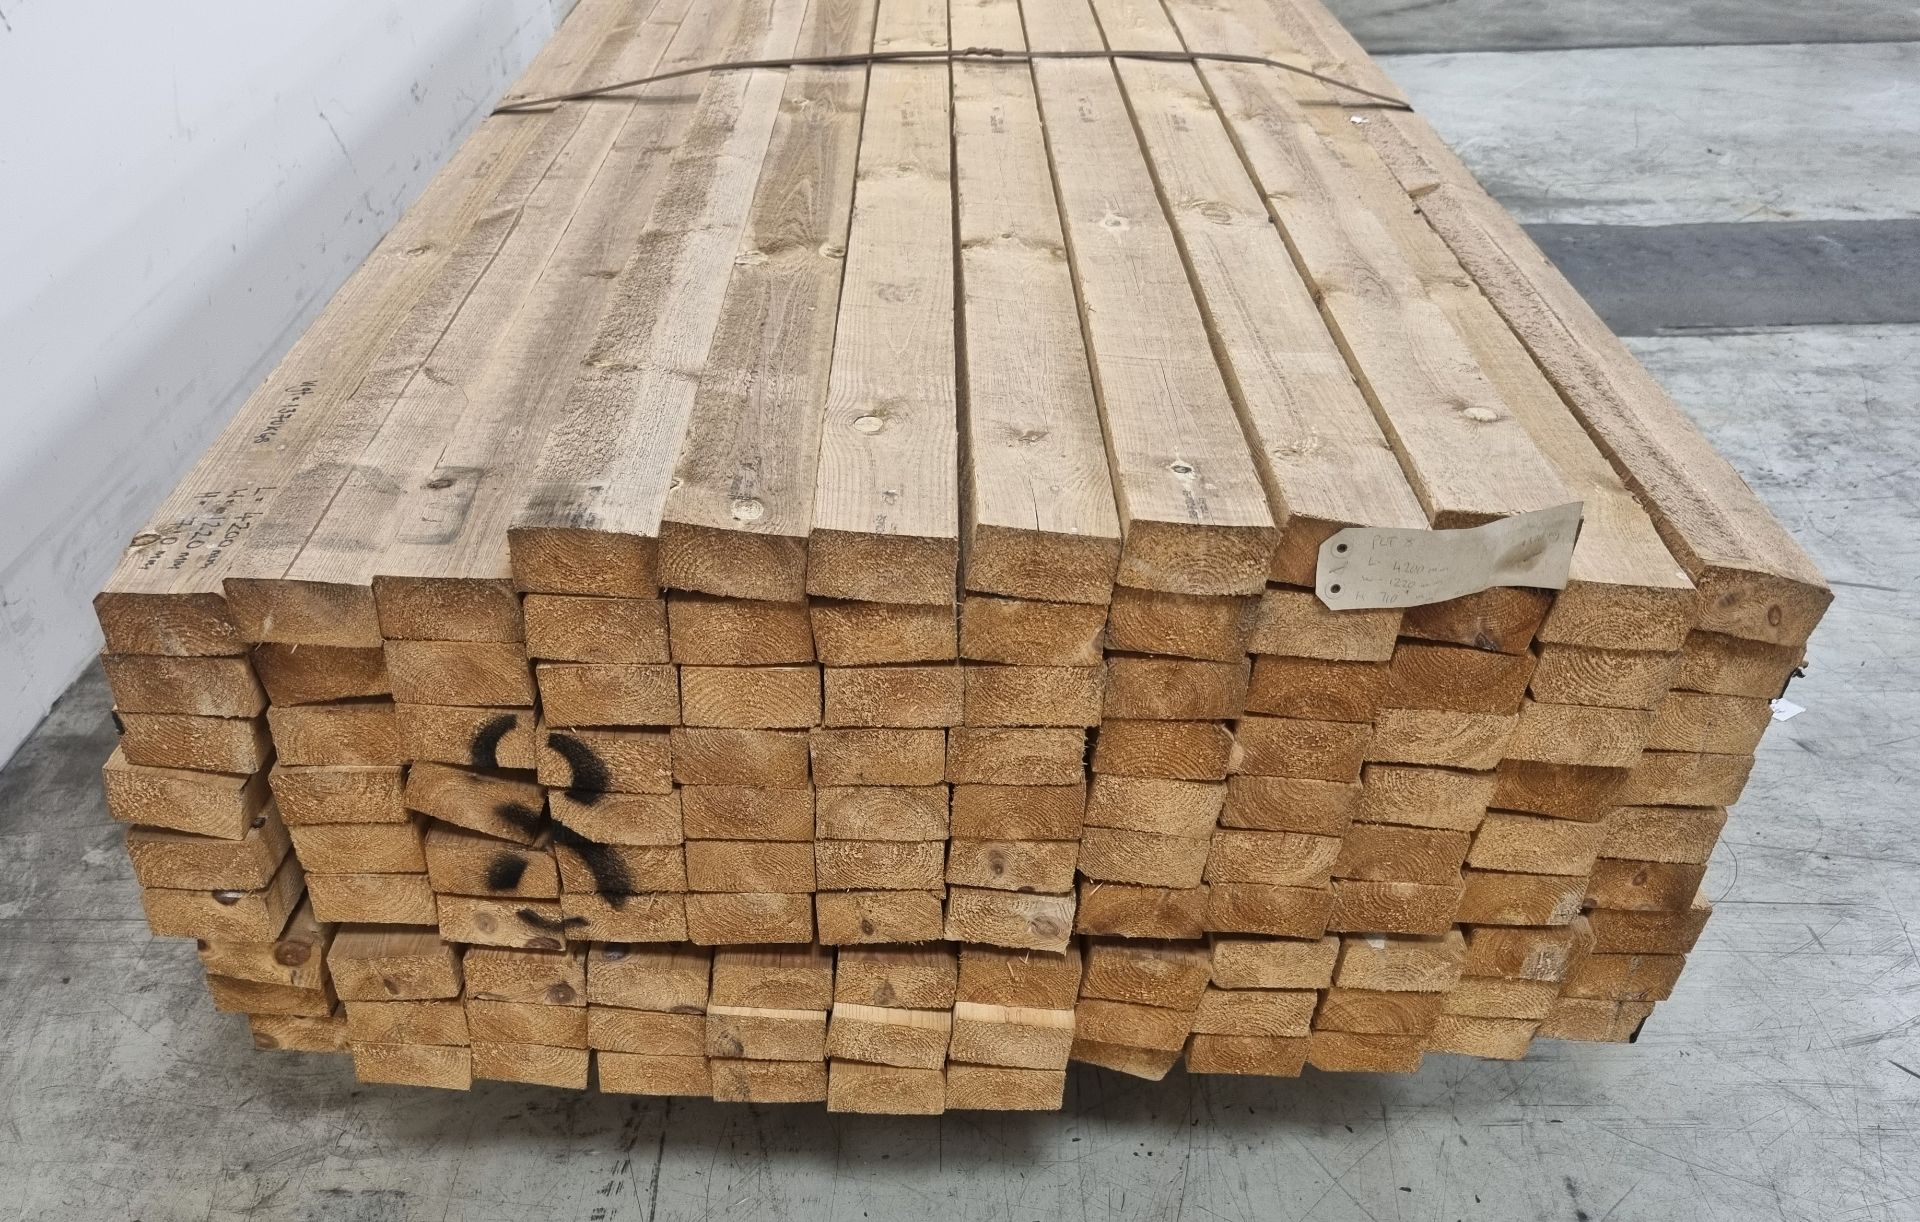 Pallet of 4"x2" (10x5cm) softwood, heat treated and debarked (GBFC-0452 DBHT) - L420cm - 115 pcs - Image 3 of 5